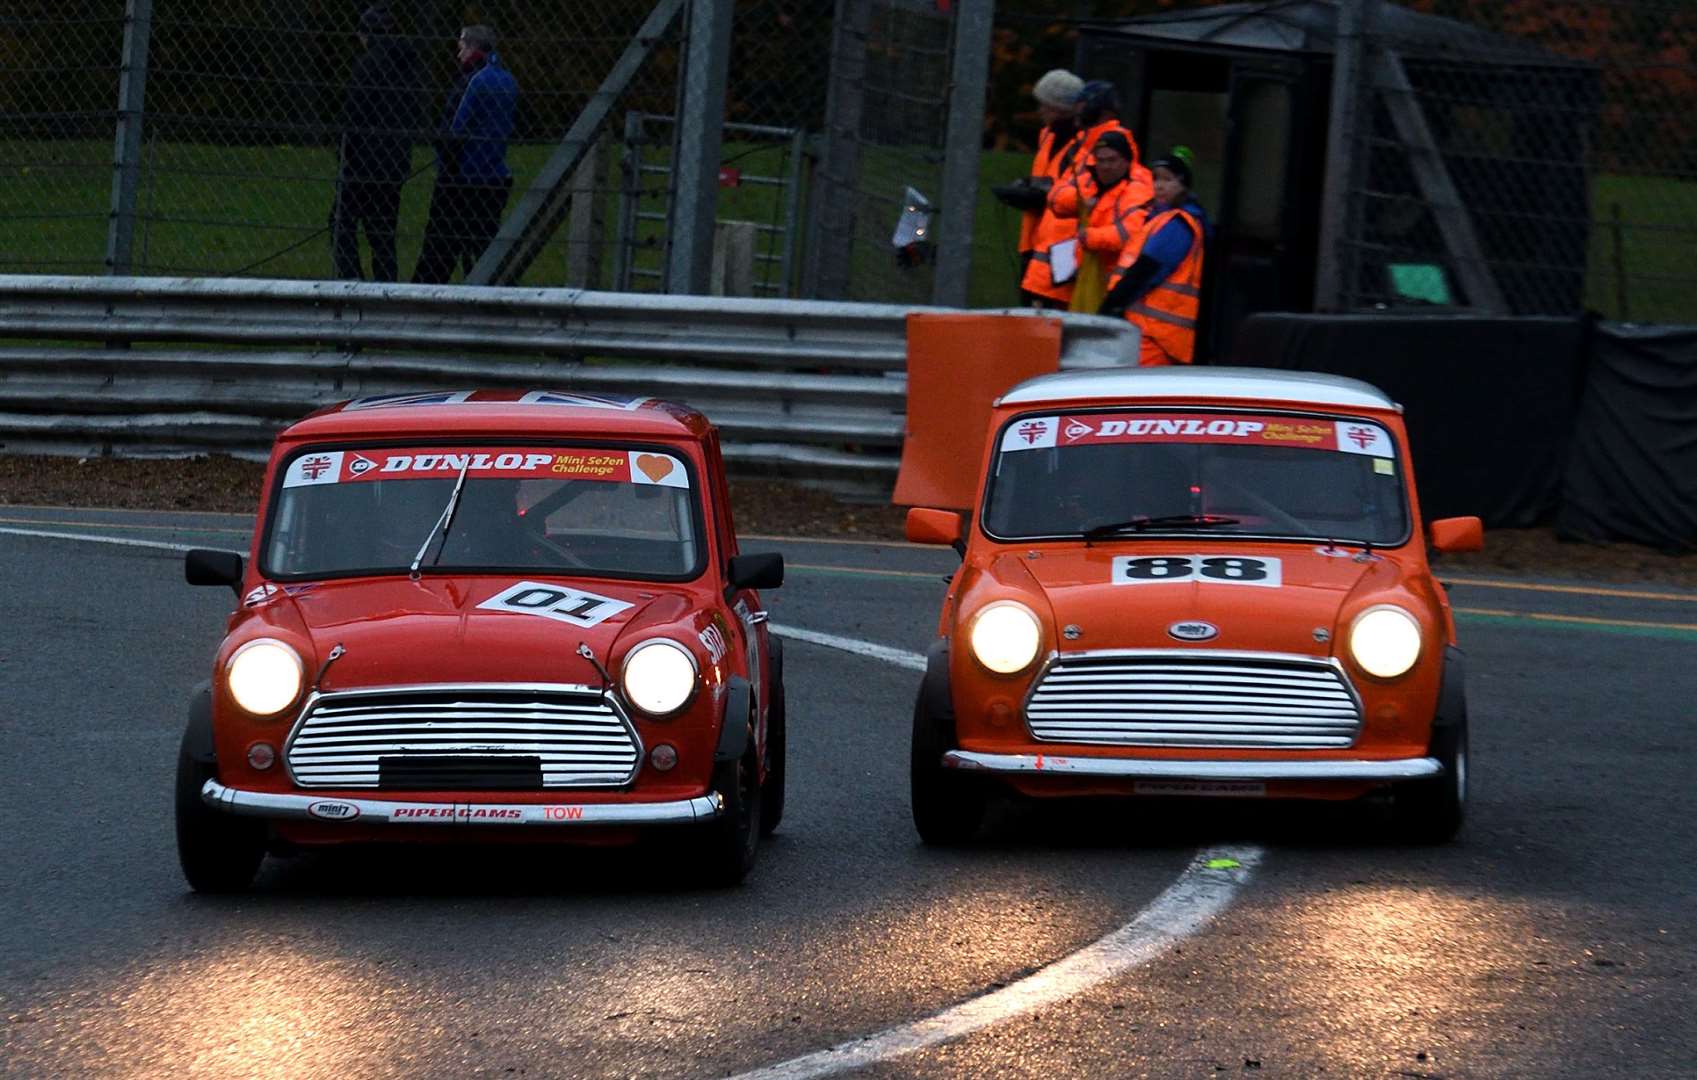 Former BTCC champion Andrew Jordan (88) took three wins in the Mini Se7en class in the Dunlop Mini Winter Challenge. He's pictured overtaking his former touring car team-mate Jeff Smith around the outside of Druids